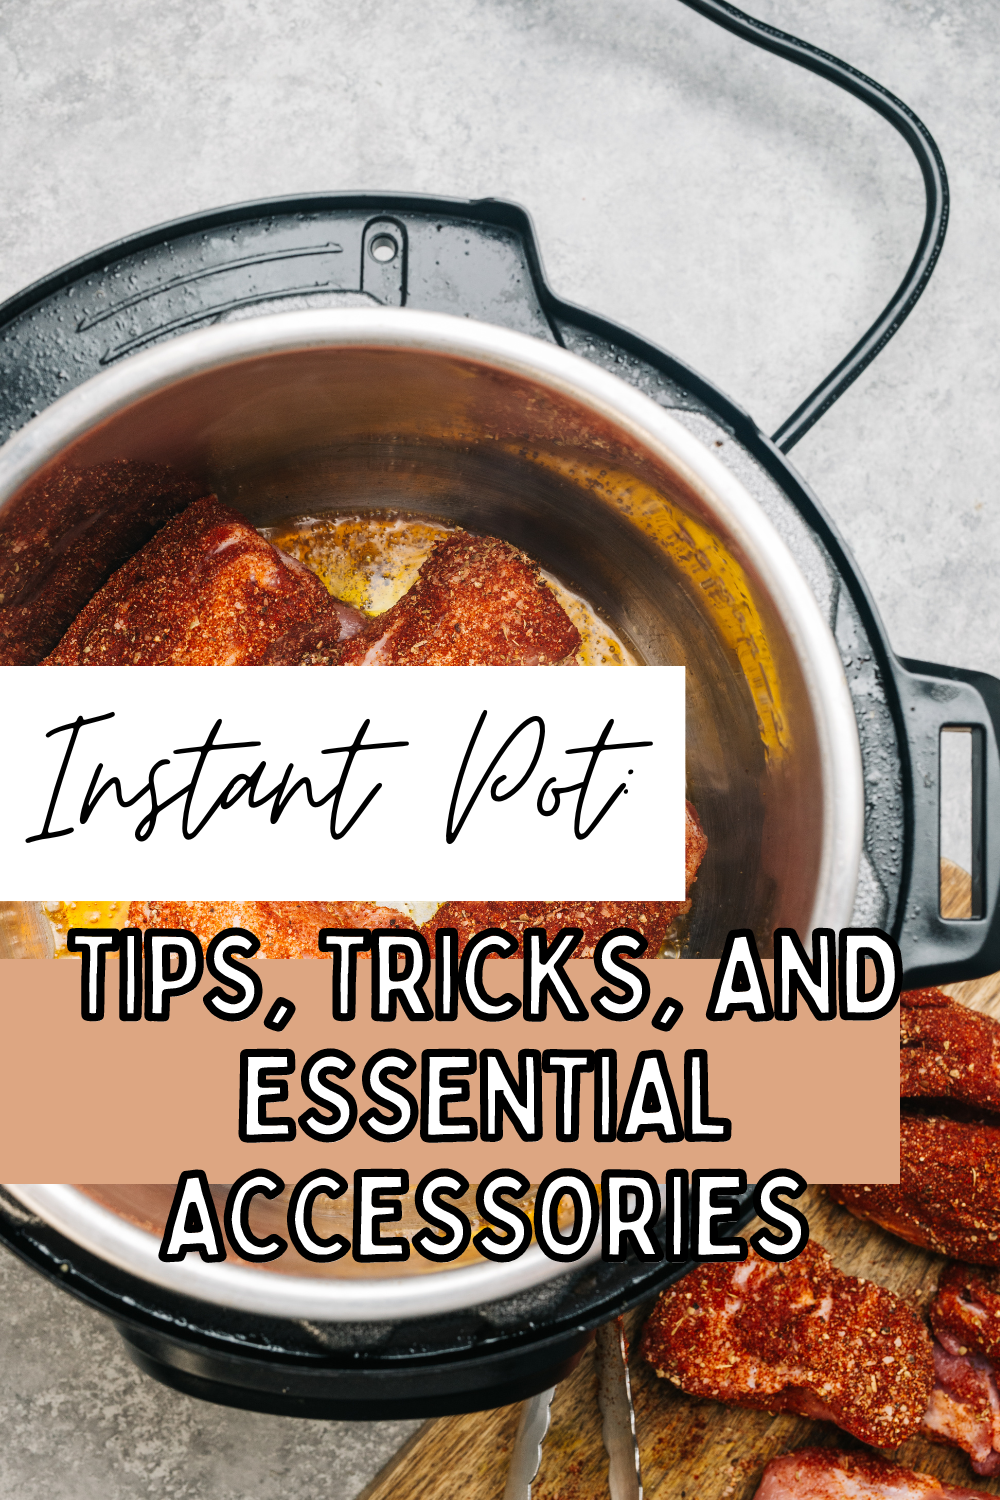 Mastering Your Instant Pot: Tips, Tricks, and Essential Accessories